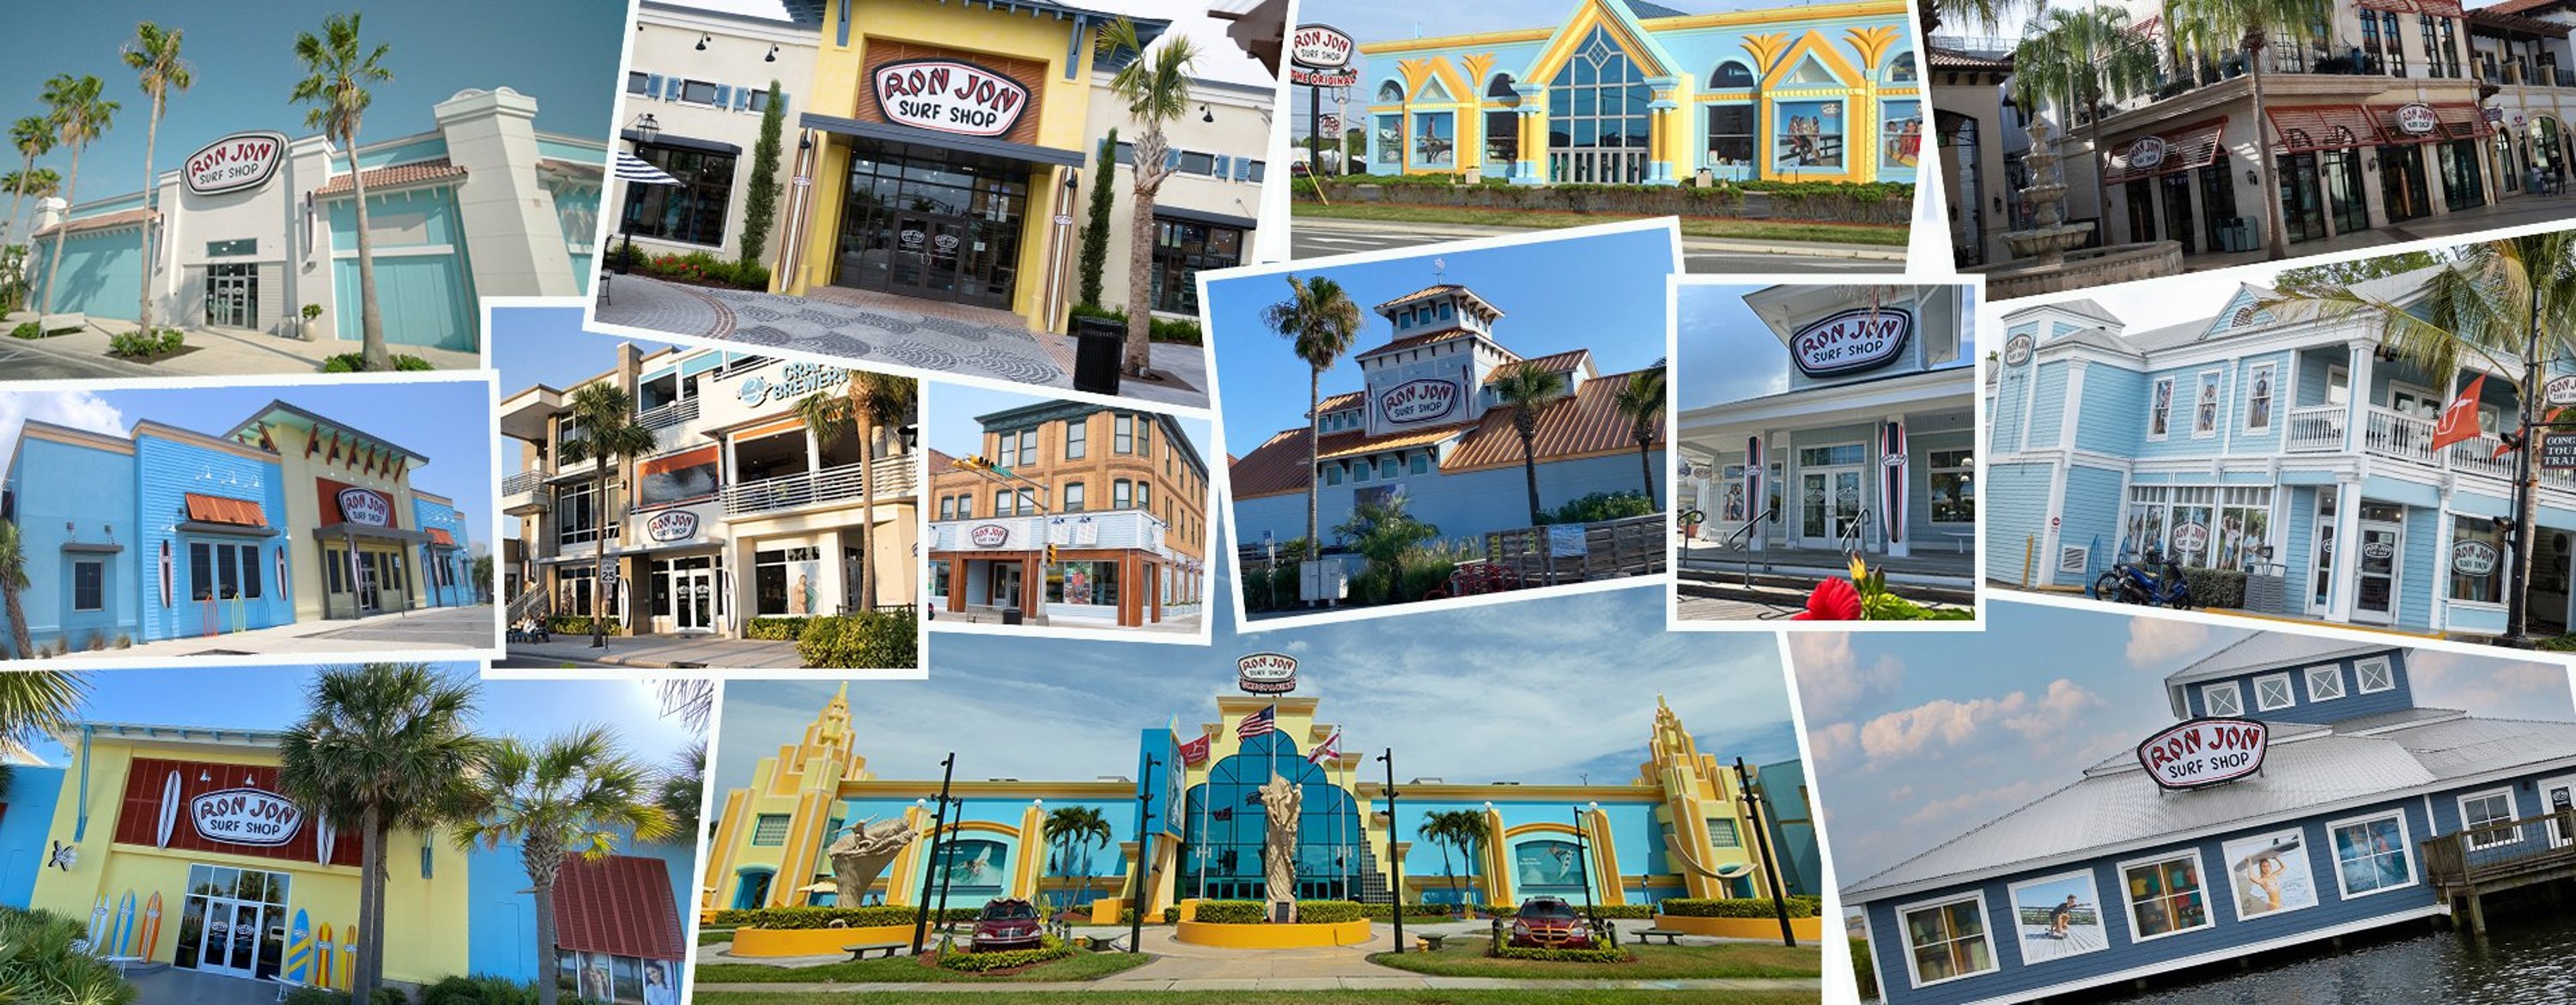 Collage of pictures showing the exterior of Ron Jon Surf Shop locations